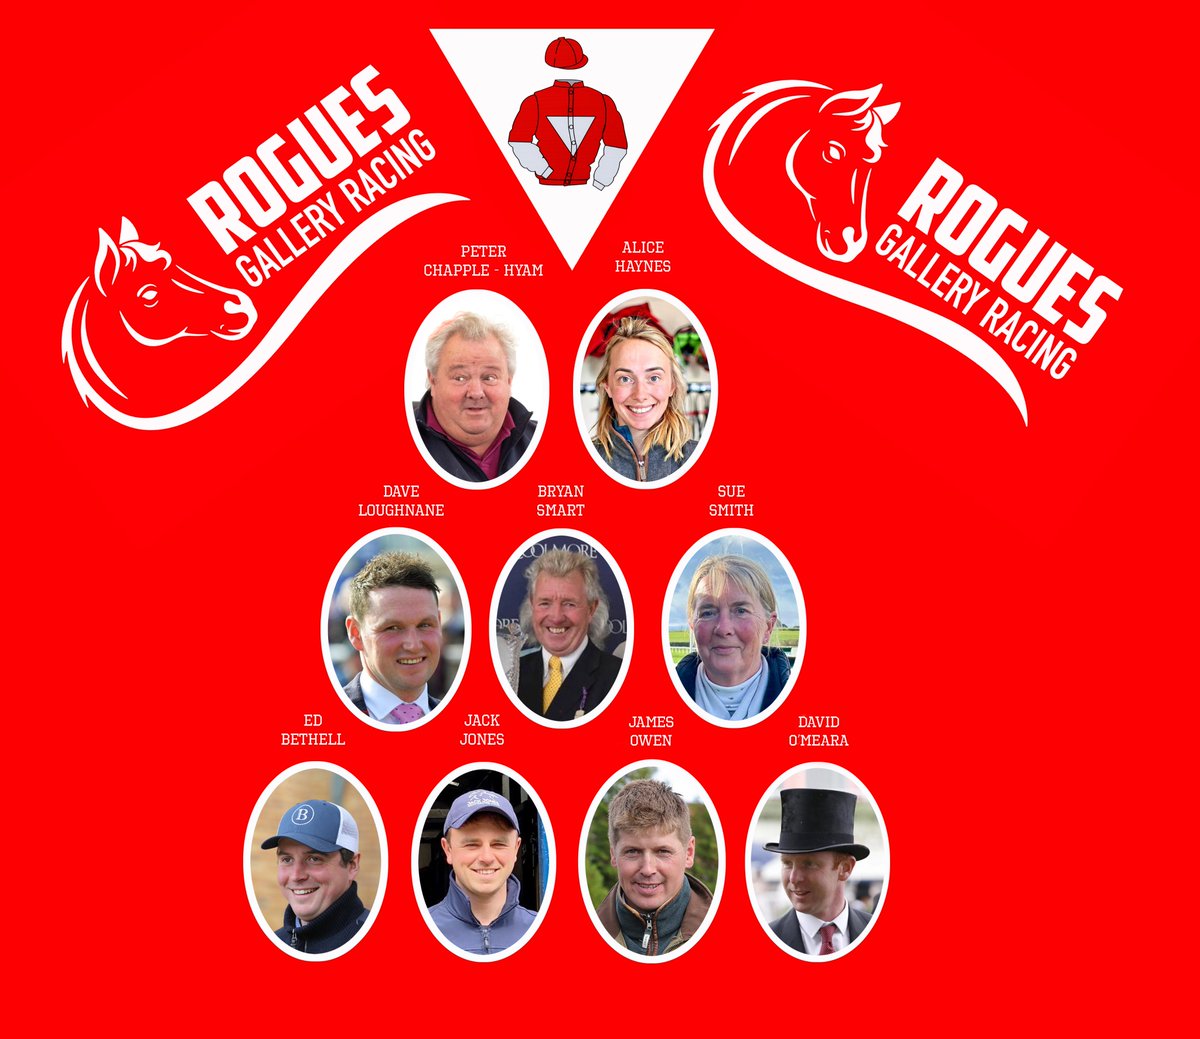 Rogues Gallery hard work and patience ready to pay off. Top team of professional trainers assembled to look after our well bought horses, and it all starts with 3 planned runners on Saturday! Few shares remaining. roguesgalleryracing.com